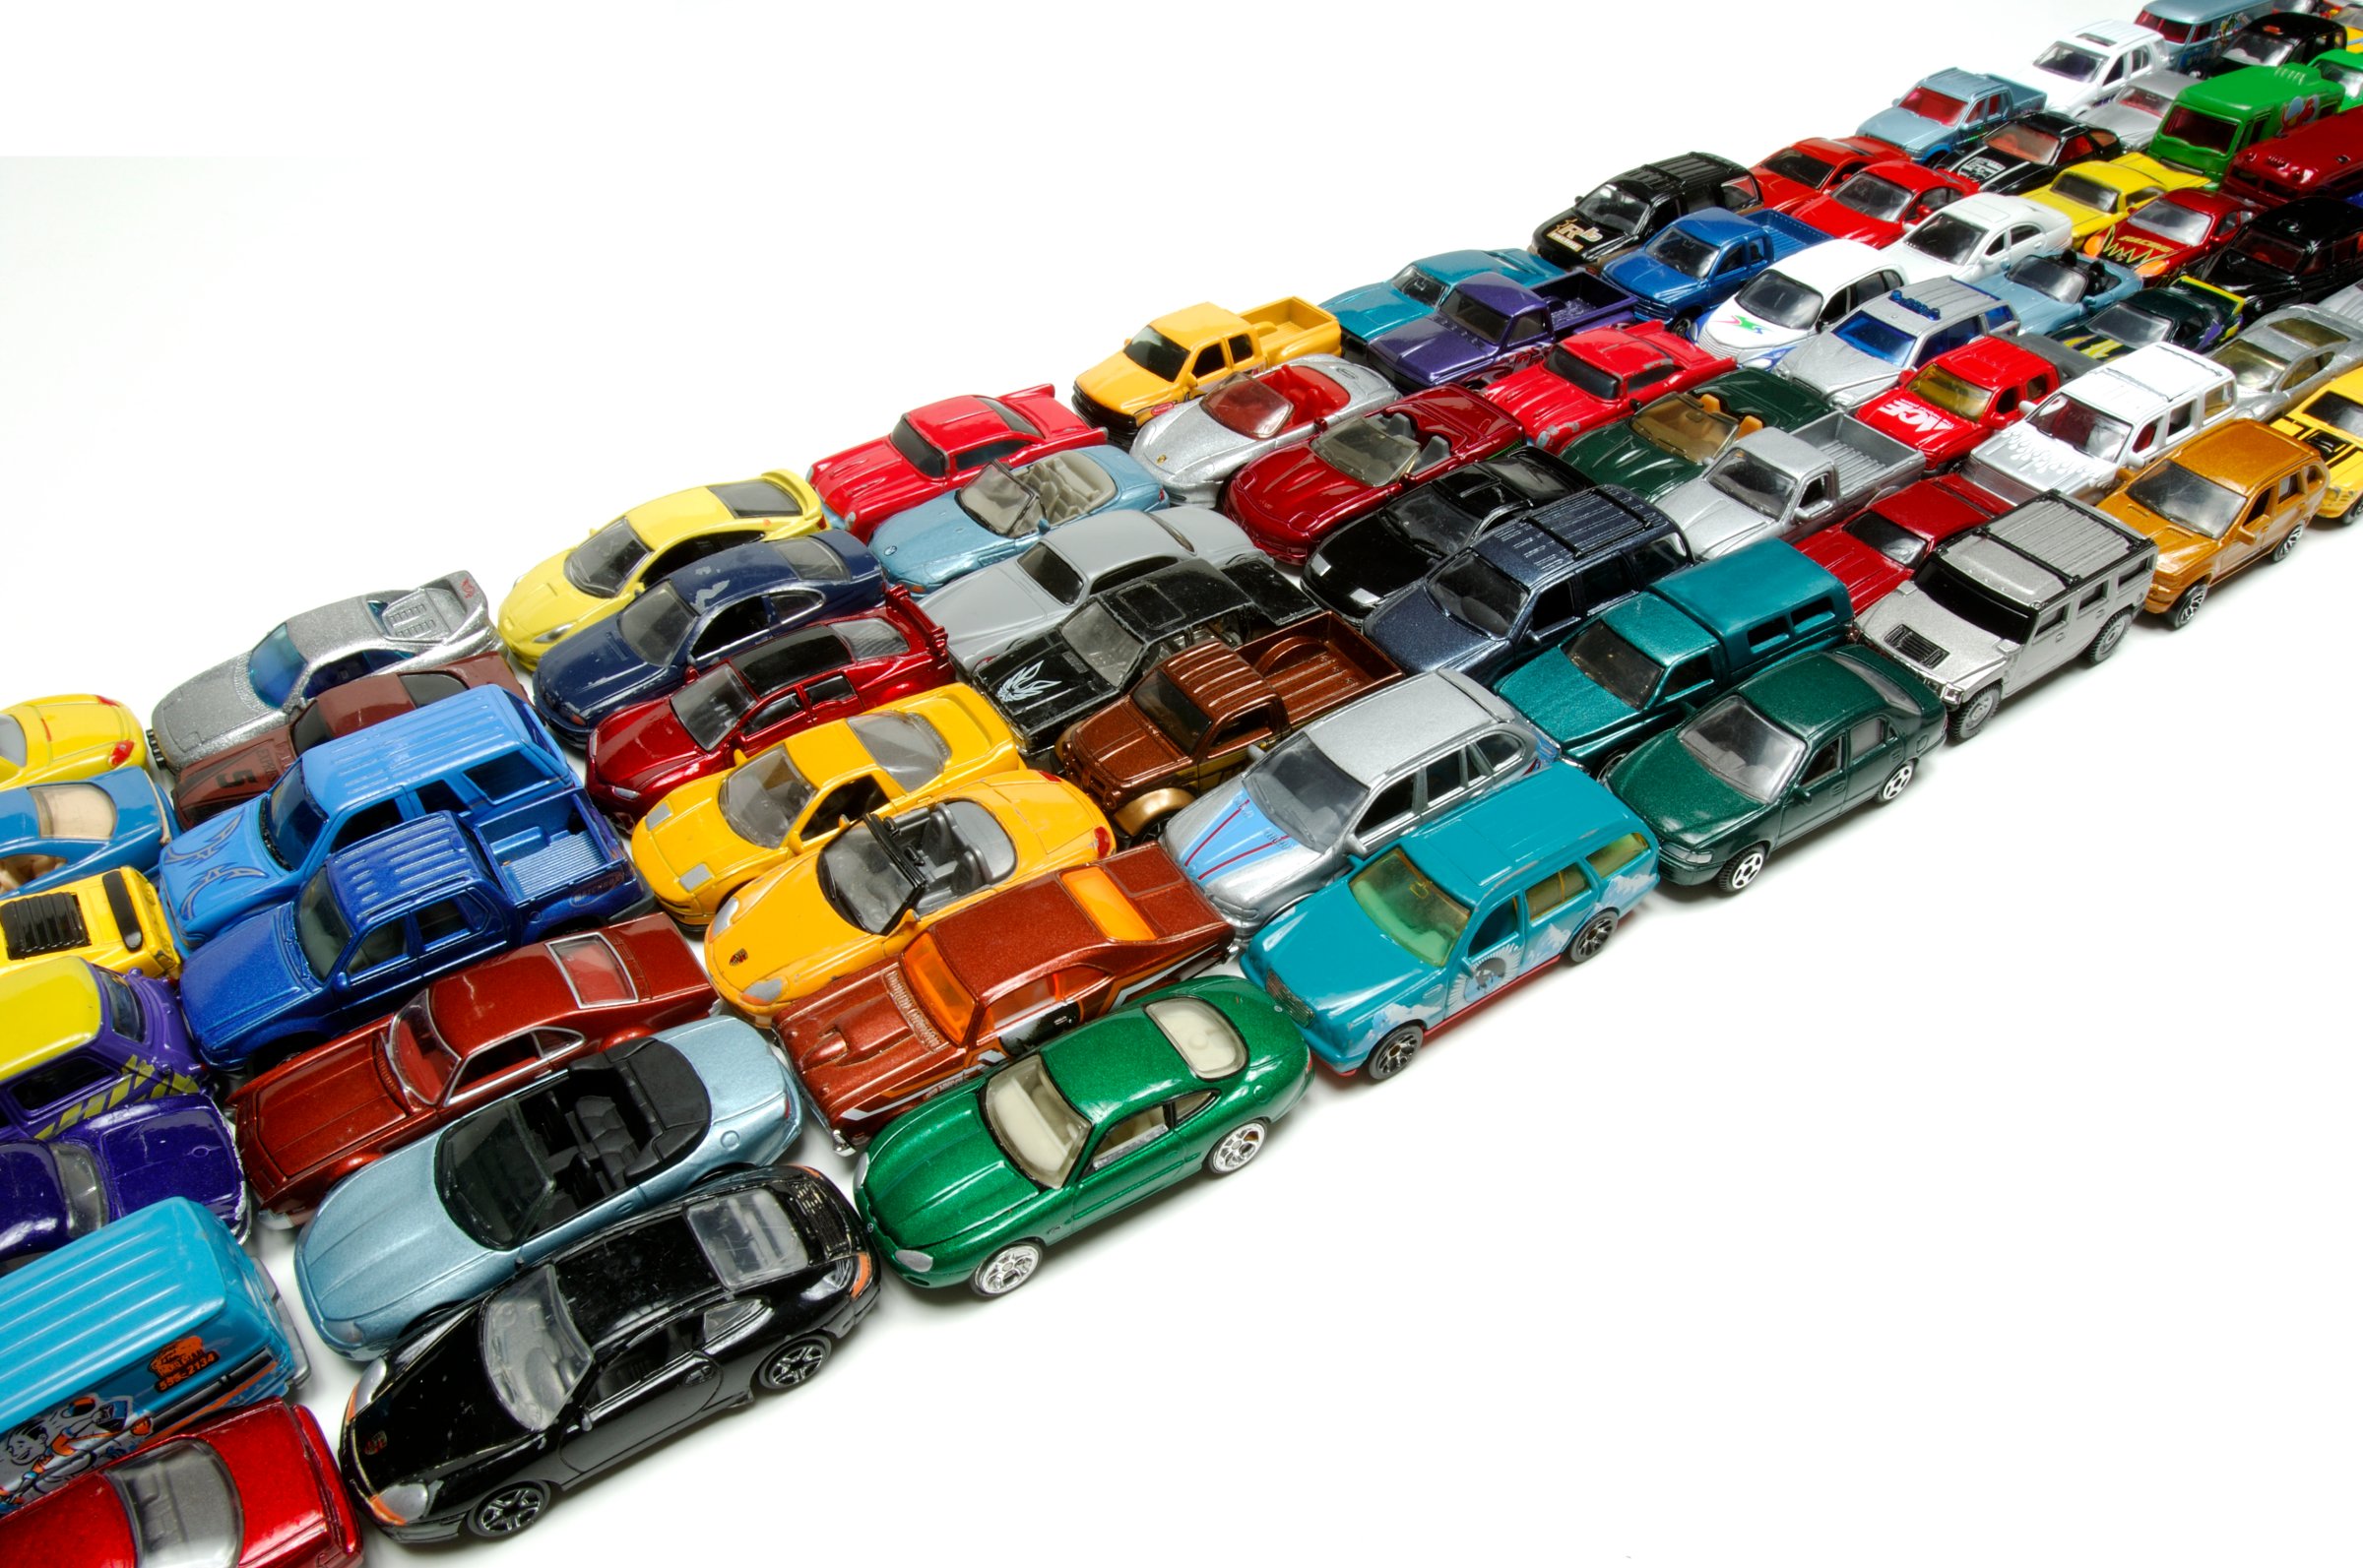 Miniature cars lined up in five lanes of traffic, side view, close-up-003